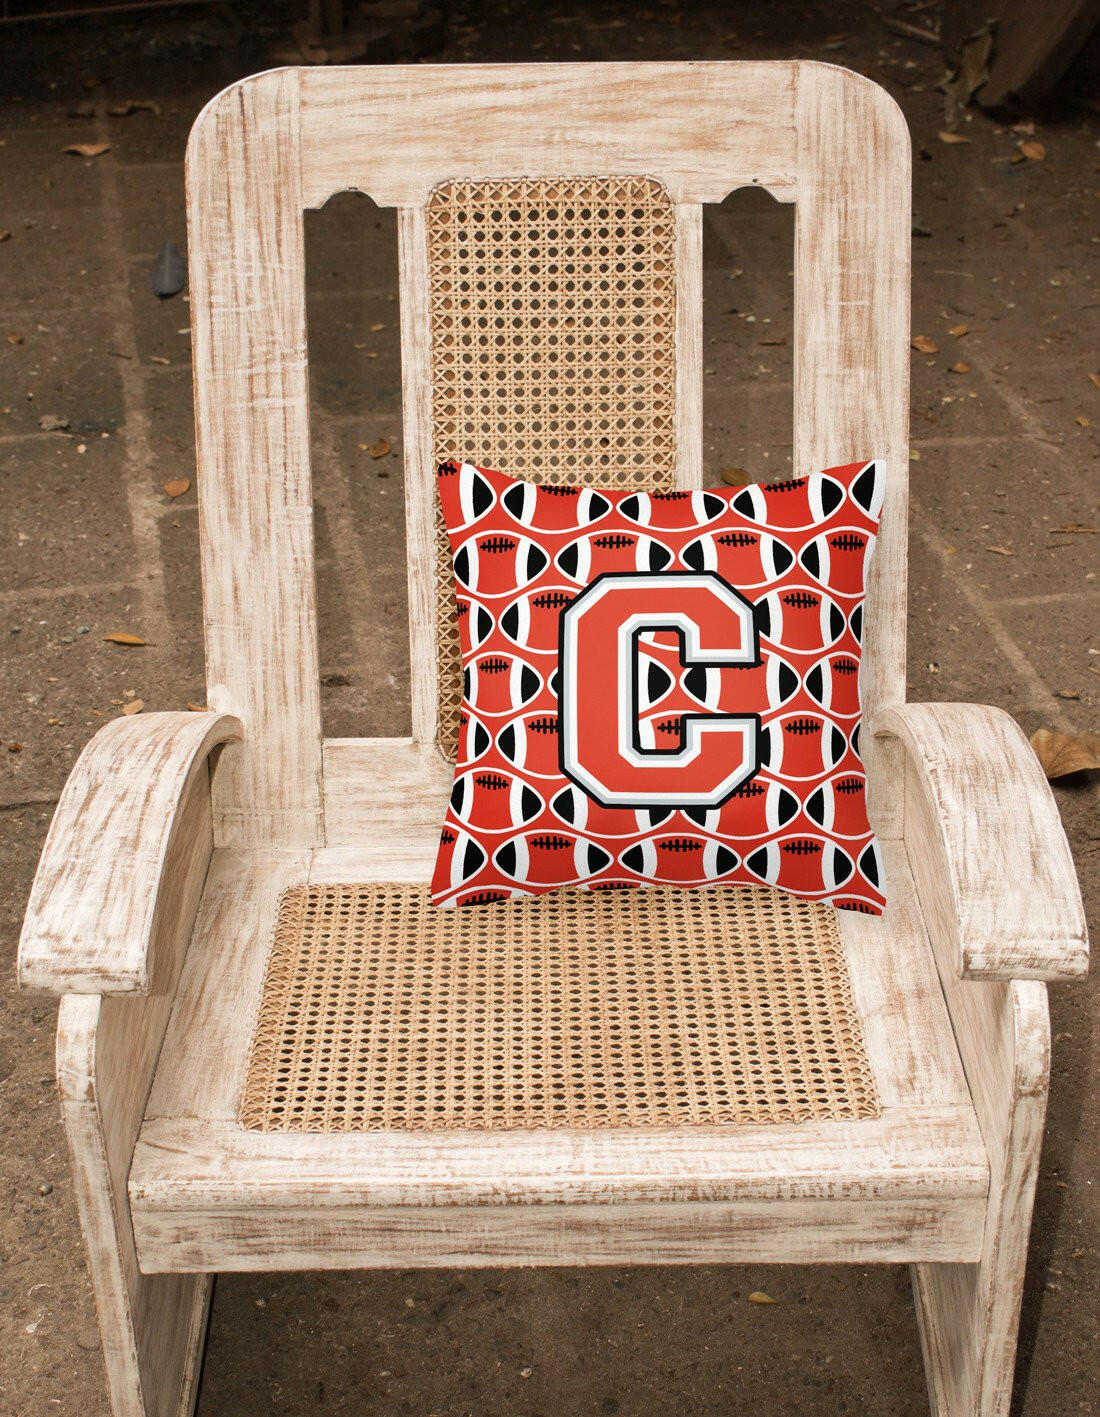 Letter C Football Scarlet and Grey Fabric Decorative Pillow CJ1067-CPW1414 by Caroline's Treasures